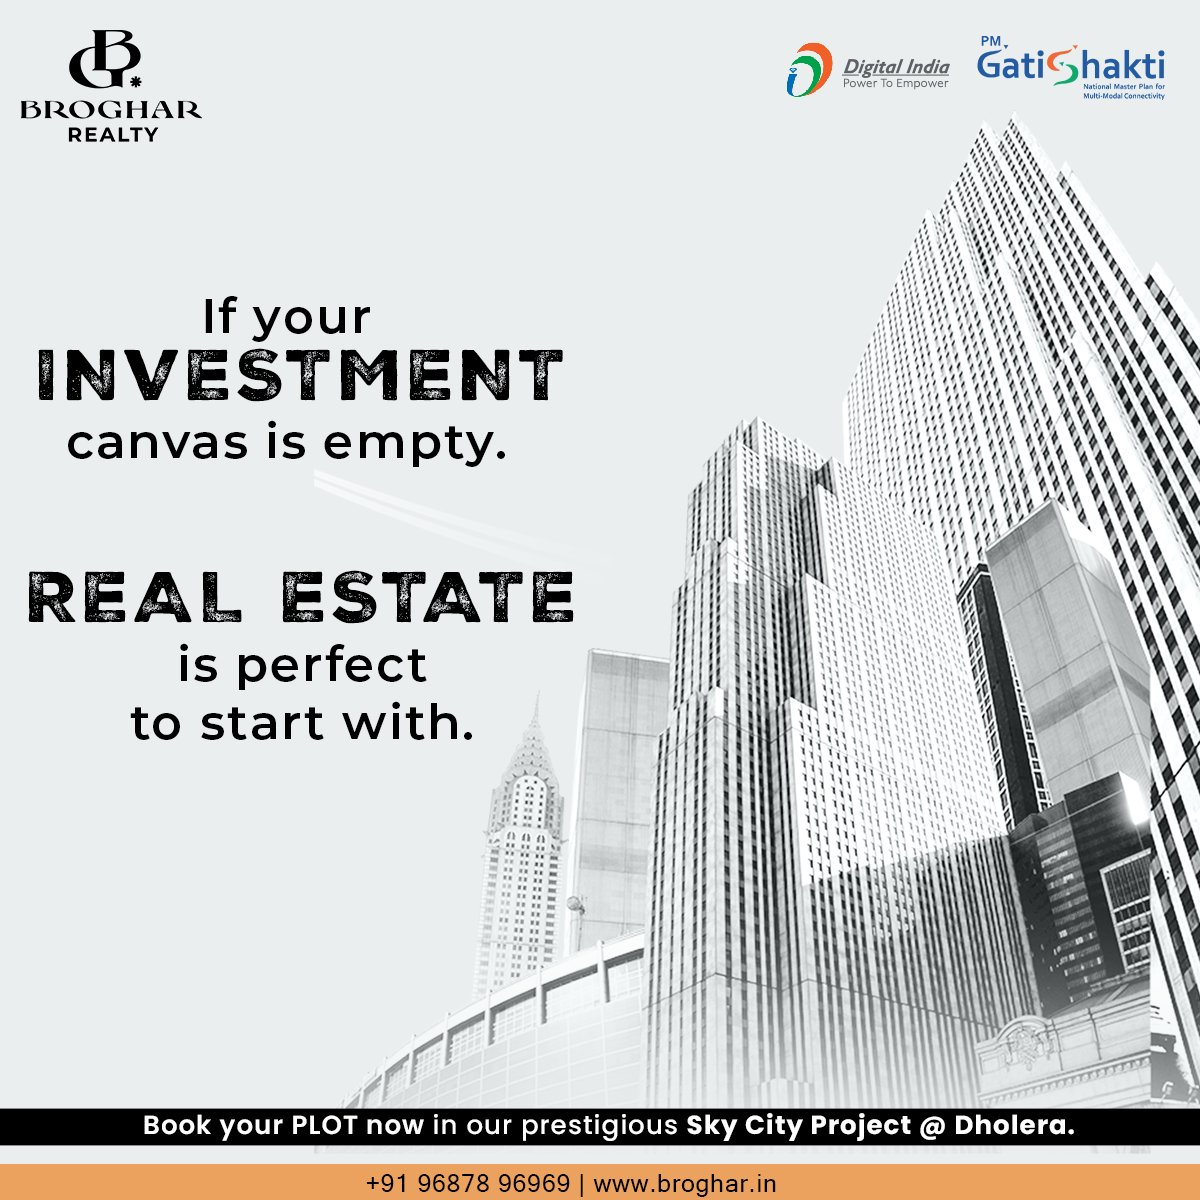 If you have not yet invested anywhere...
Real Estate can be the perfect start...

If you don't know how to do that...
Connect with Broghar Realty...

#broghar #brogharrealty #dholera #investment #dholerasir #invest #DholeraSmartCity #returns #money #affordable #plots #land #villa